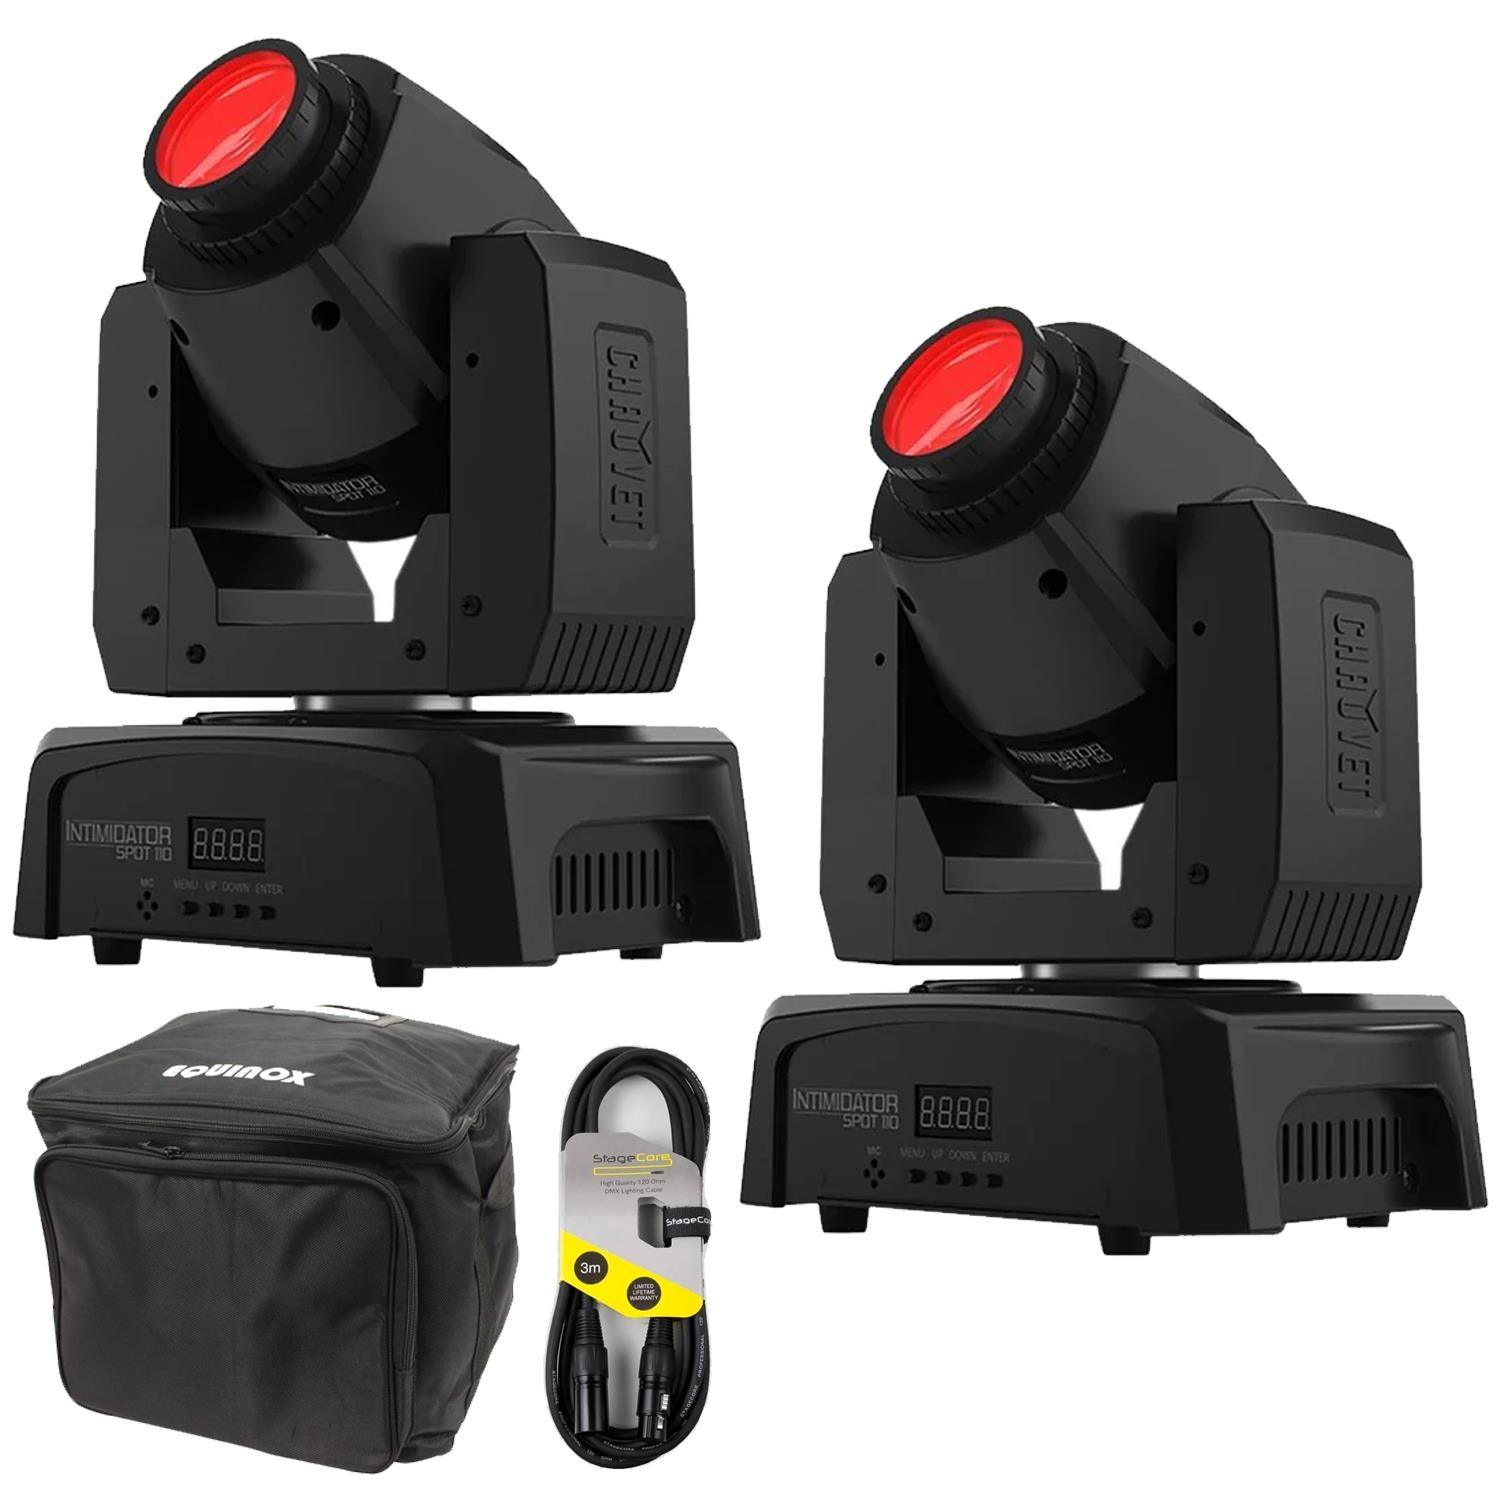 2 x Chauvet DJ intimidator Spot 110 Moving Head with Carry Bag - DY Pro Audio